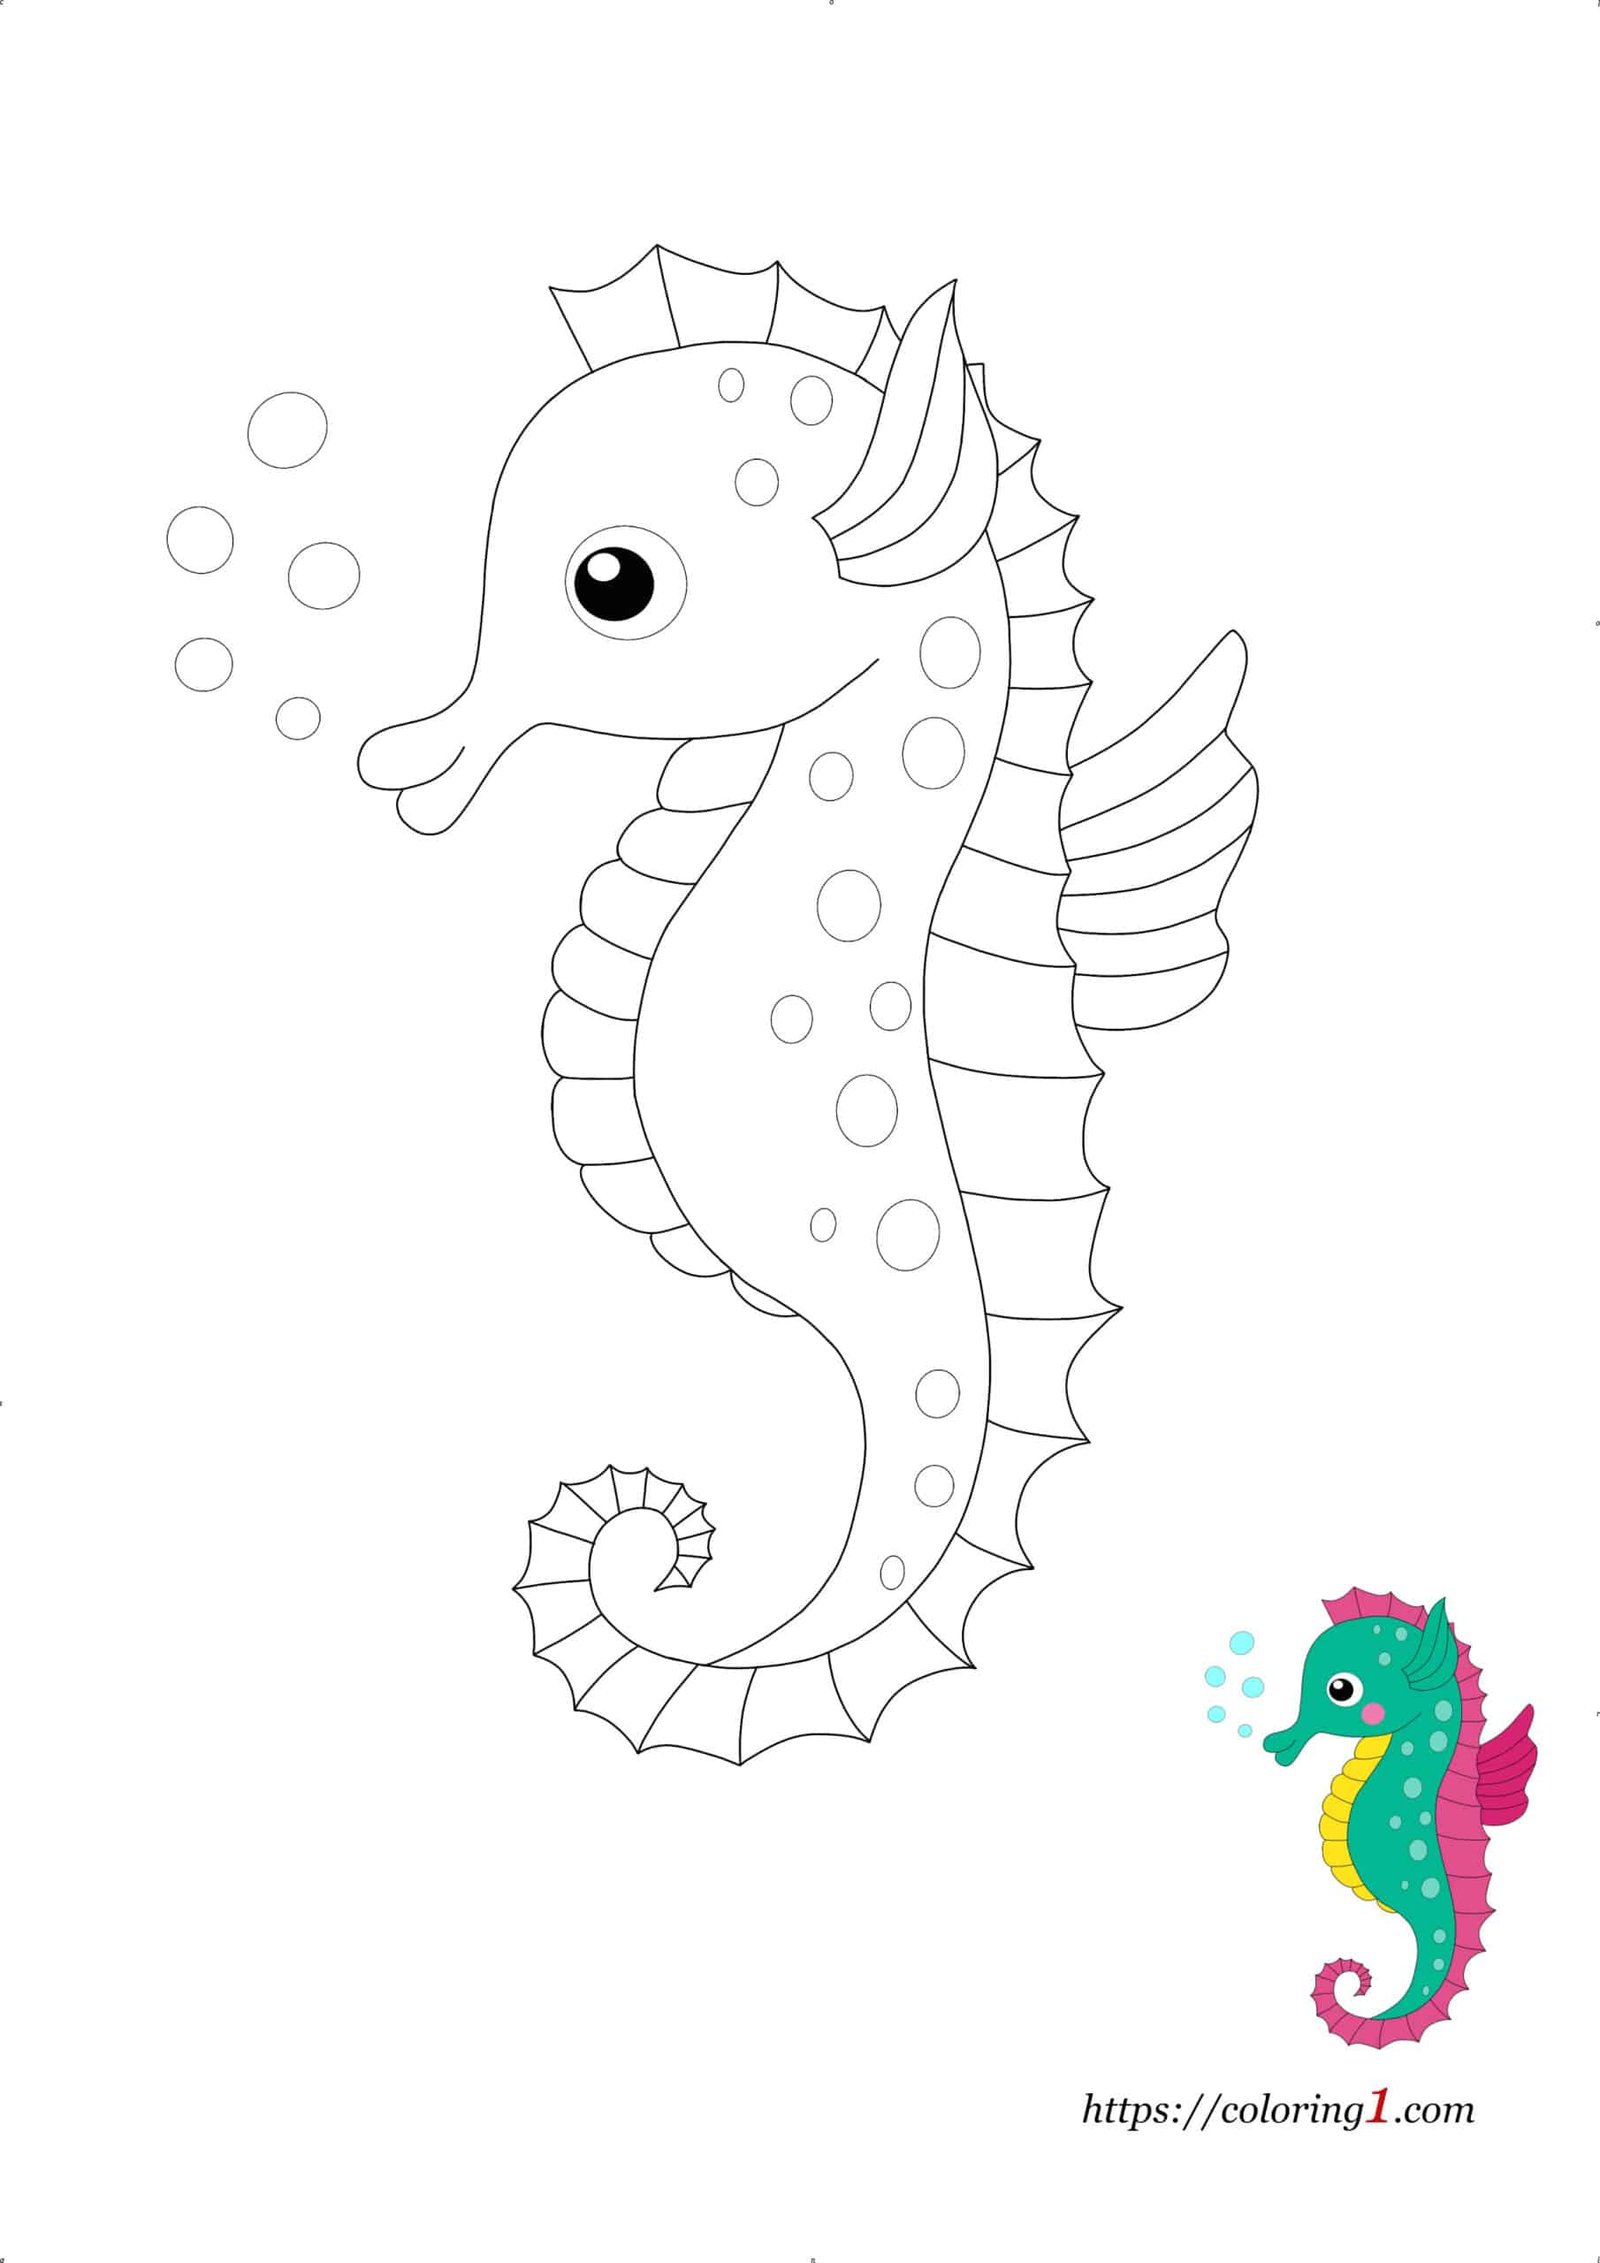 Sea Horse printable coloring page to print